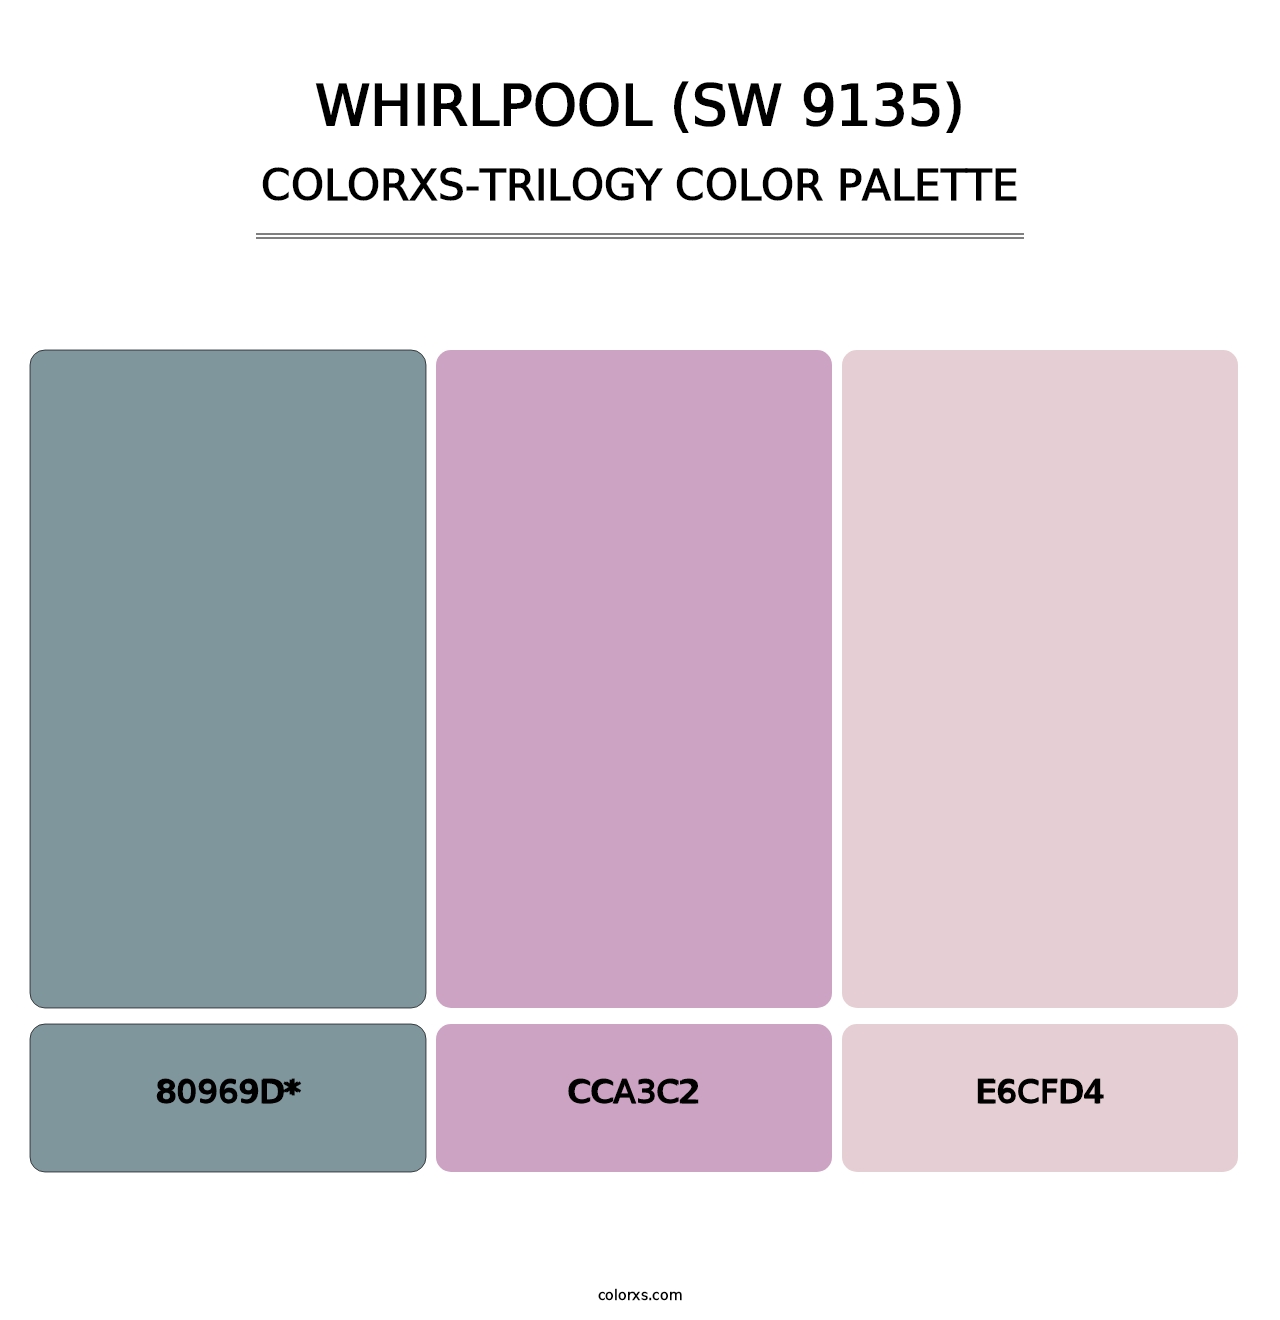 Whirlpool (SW 9135) - Colorxs Trilogy Palette